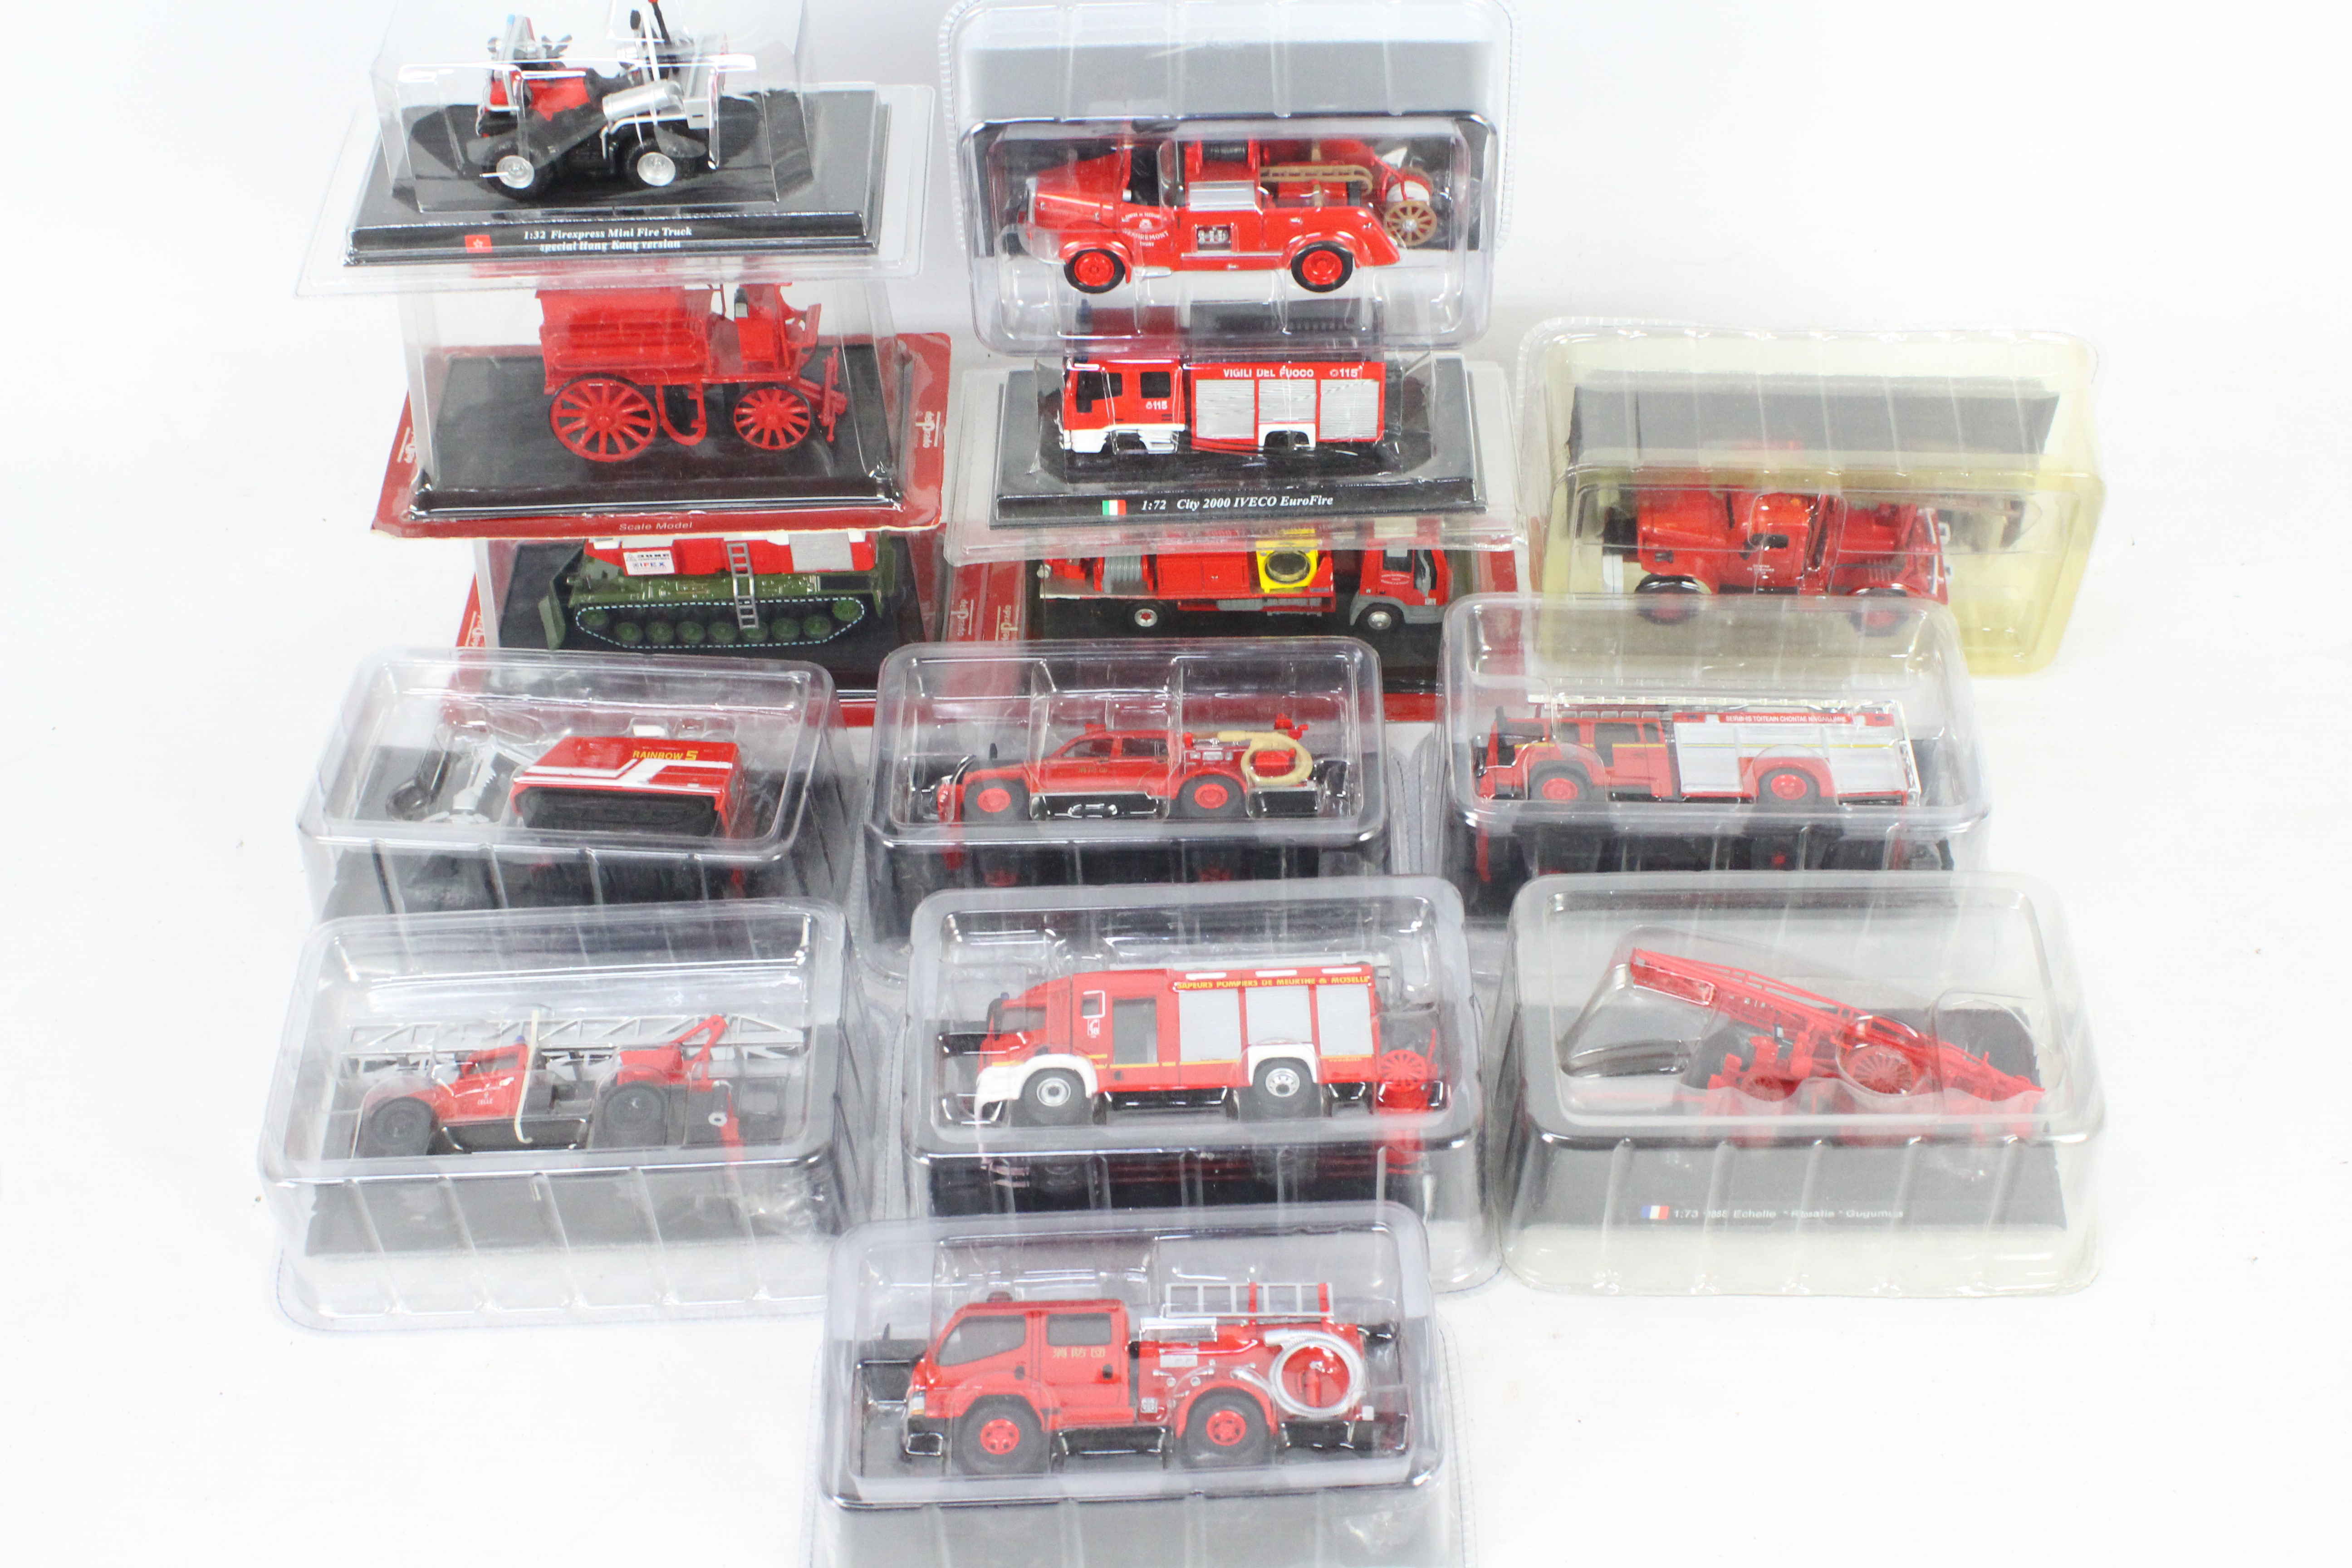 Del Prado - A group of 14 bubble packed Del Prado Fire Brigade models and appliances in various